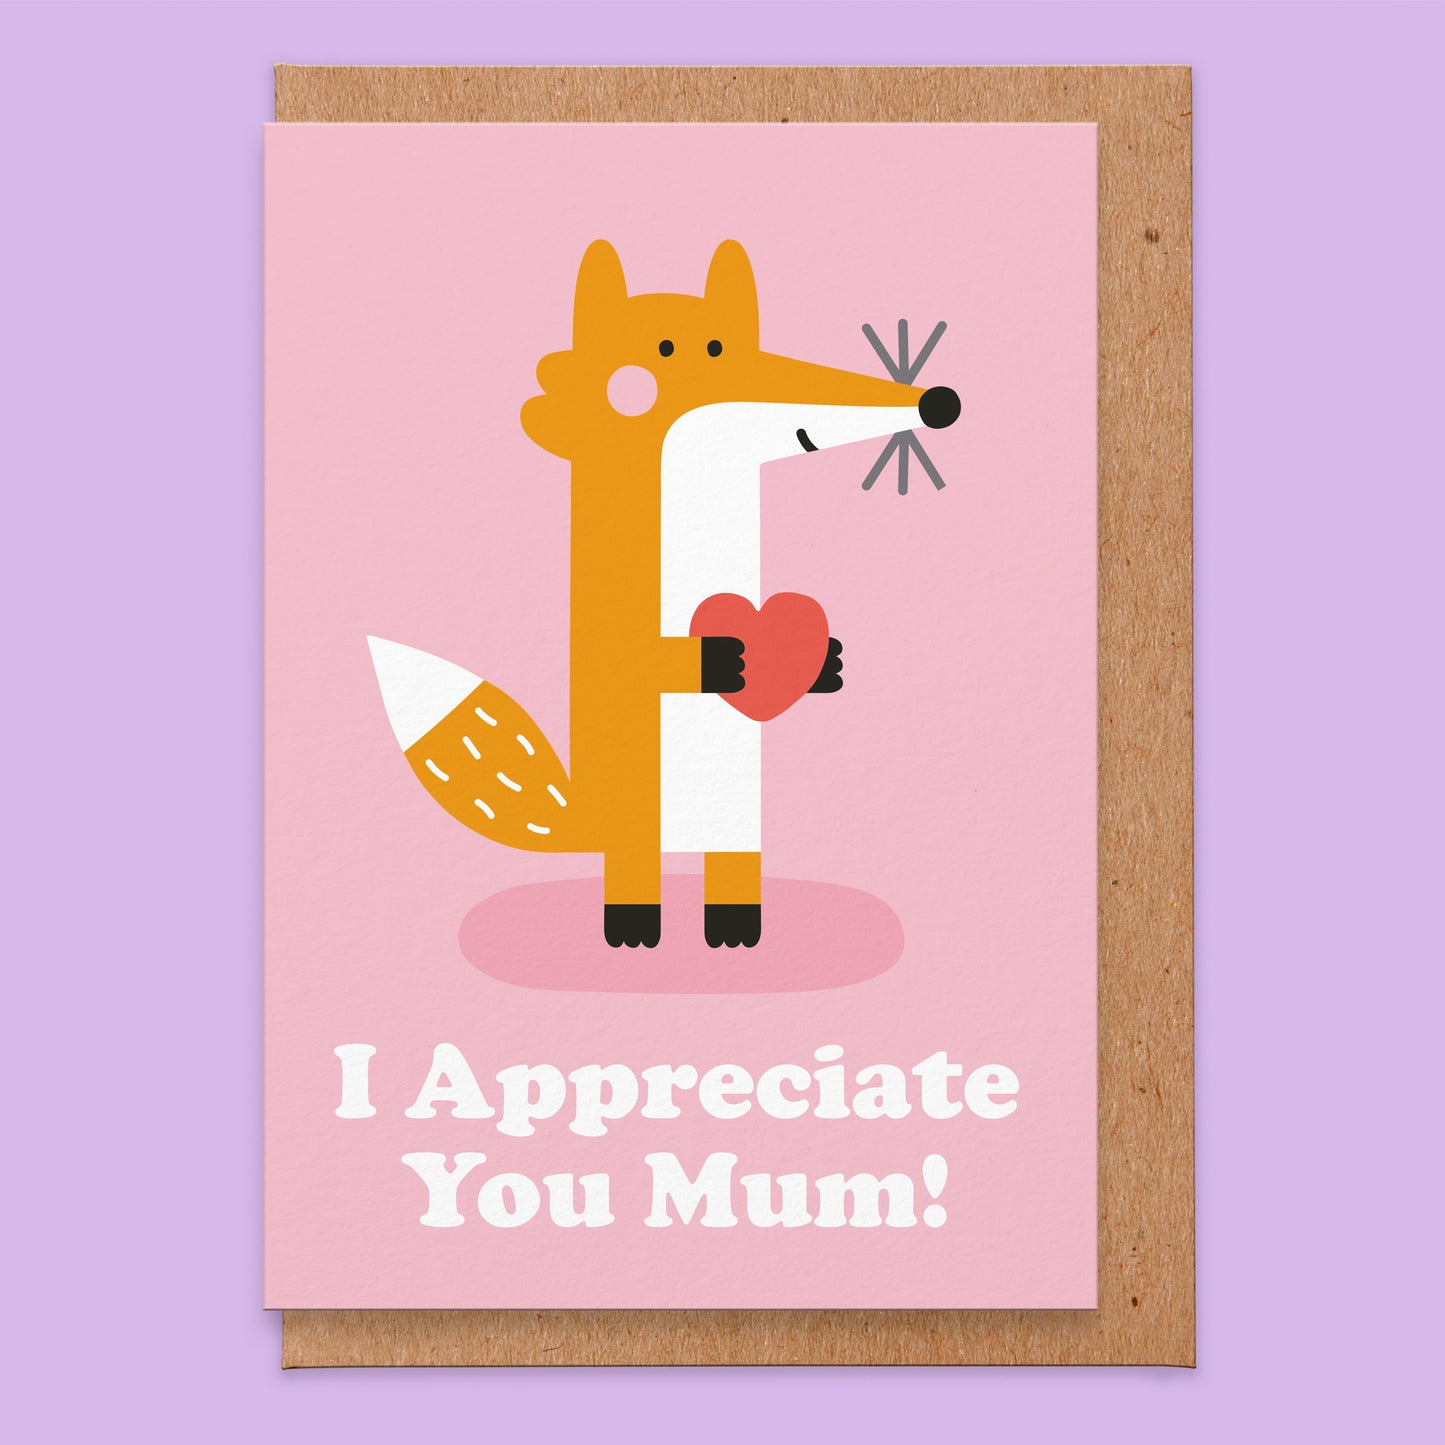 Greetings Card that says I Appreciate You Mum! and has an illustration of a fox  holding a heart